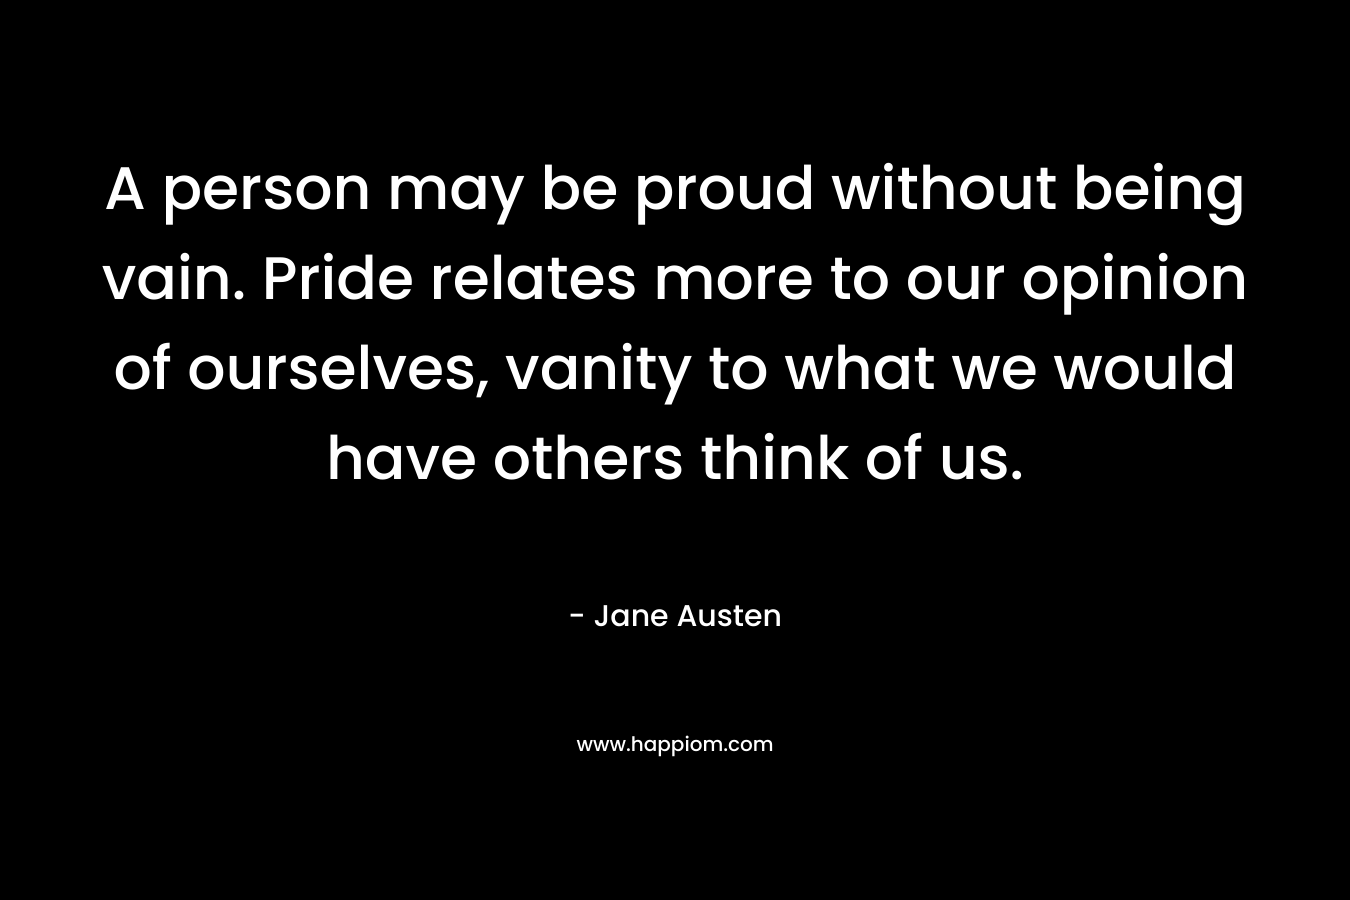 A person may be proud without being vain. Pride relates more to our opinion of ourselves, vanity to what we would have others think of us.